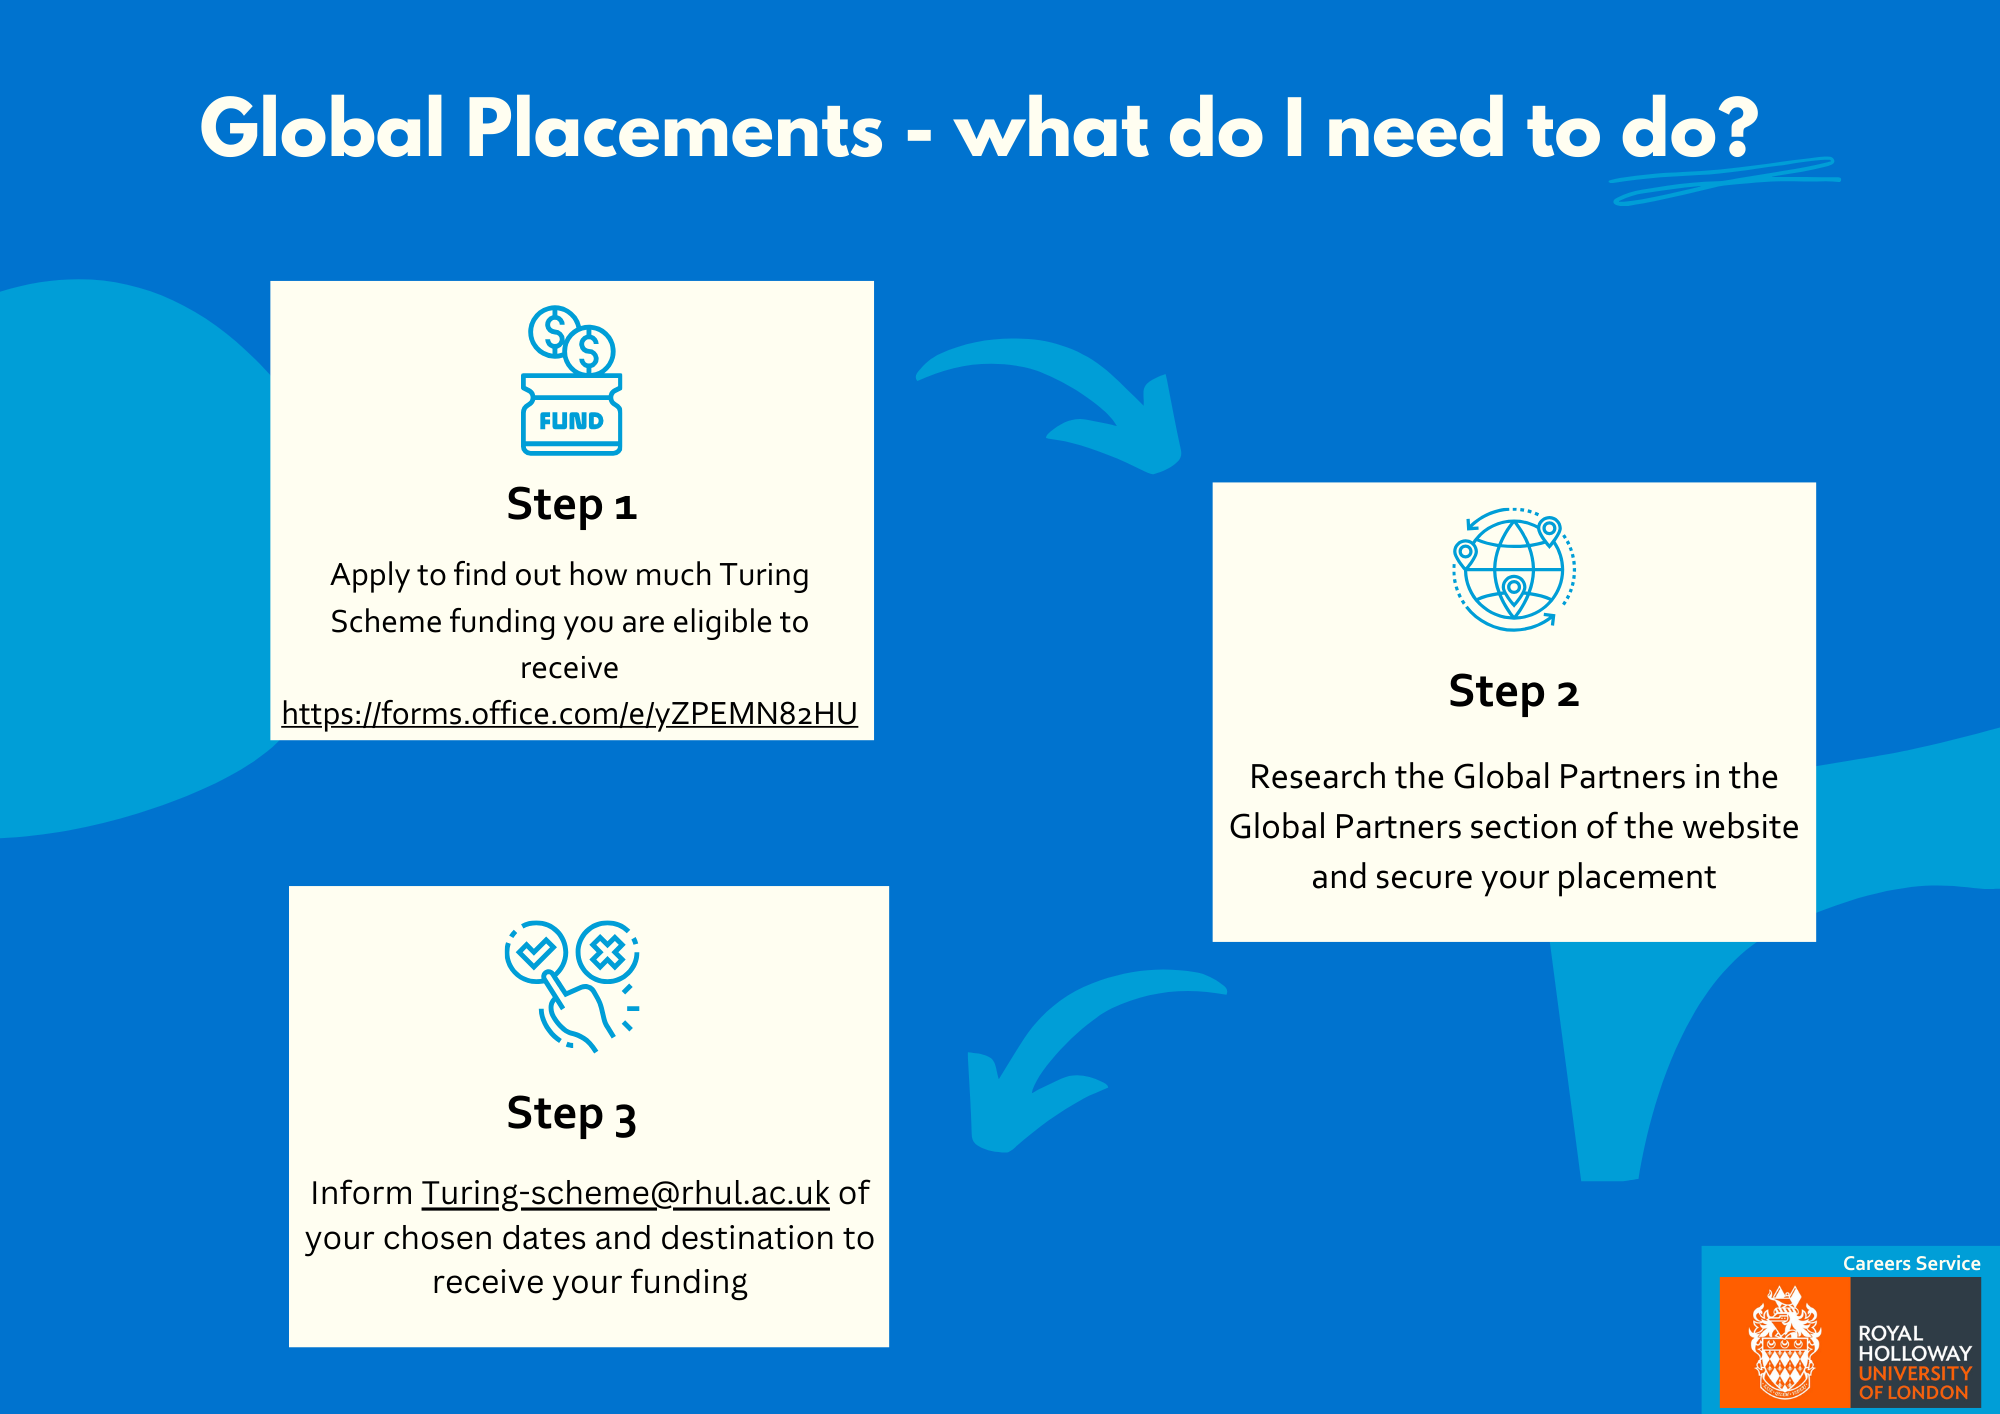 Global Placements - what do I need to do (1)